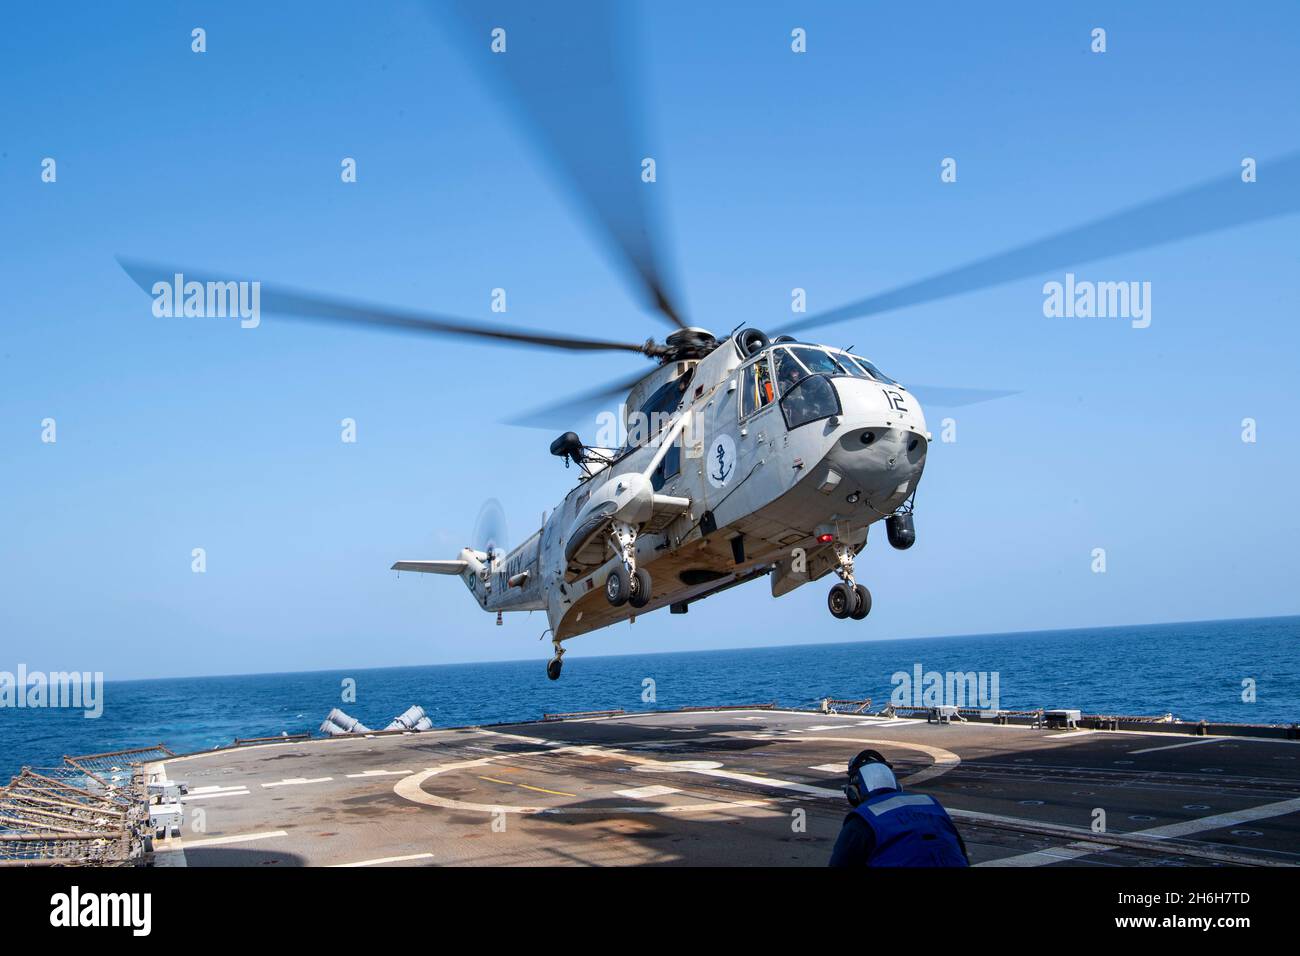 210906-N-JW440-2062 ARABIAN SEA (Sept. 6, 2021) A Pakistan Navy SH-3 Sea King helicopter lands on the flight deck of the guided-missile cruiser USS Shiloh (CG 67) during a passing exercise (PASSEX) with Pakistan Navy frigate PNS Alamgir (F 260) in the Arabian Sea, Sept. 6. Shiloh is deployed to the U.S. 5th Fleet area of operations in support of naval operations to ensure maritime stability and security in the Central Region, connecting the Mediterranean and the Pacific through the western Indian Ocean and three strategic choke points. (U.S. Navy photo by Mass Communication Specialist 1st Clas Stock Photo